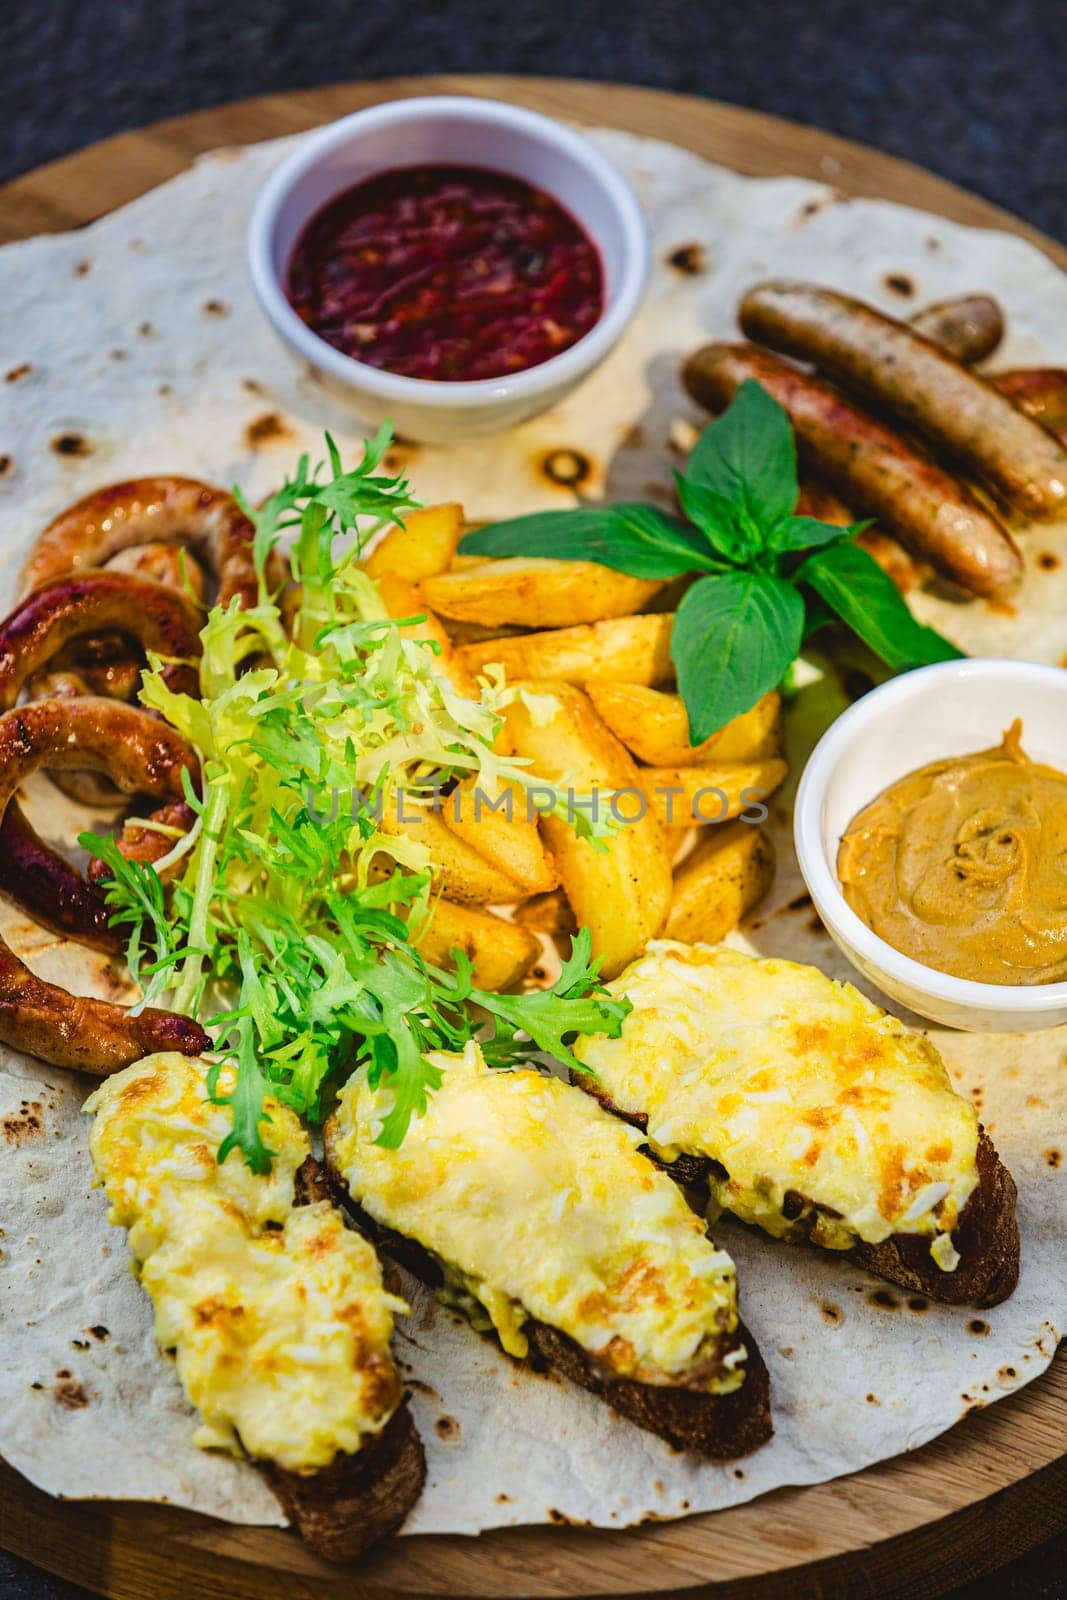 German style grilled sausages with potato wedges and bread with cheese and sauces close-up on a wooden tray on the table. Shallow dof